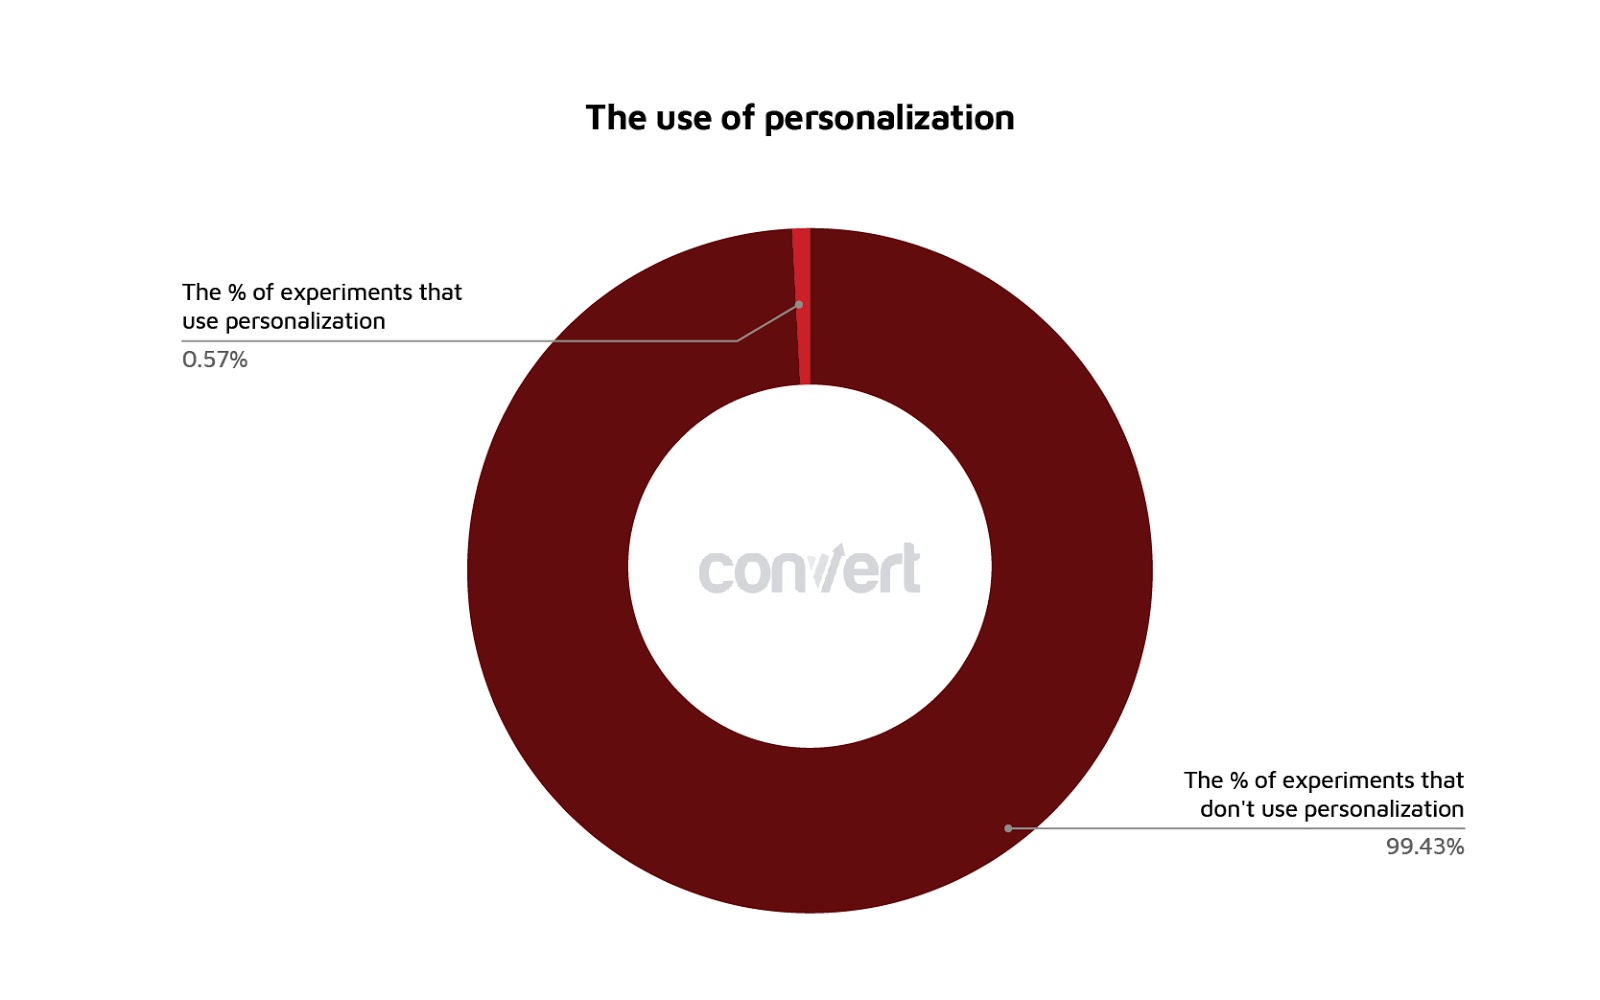 chart showing the use of personalization in experimentation.